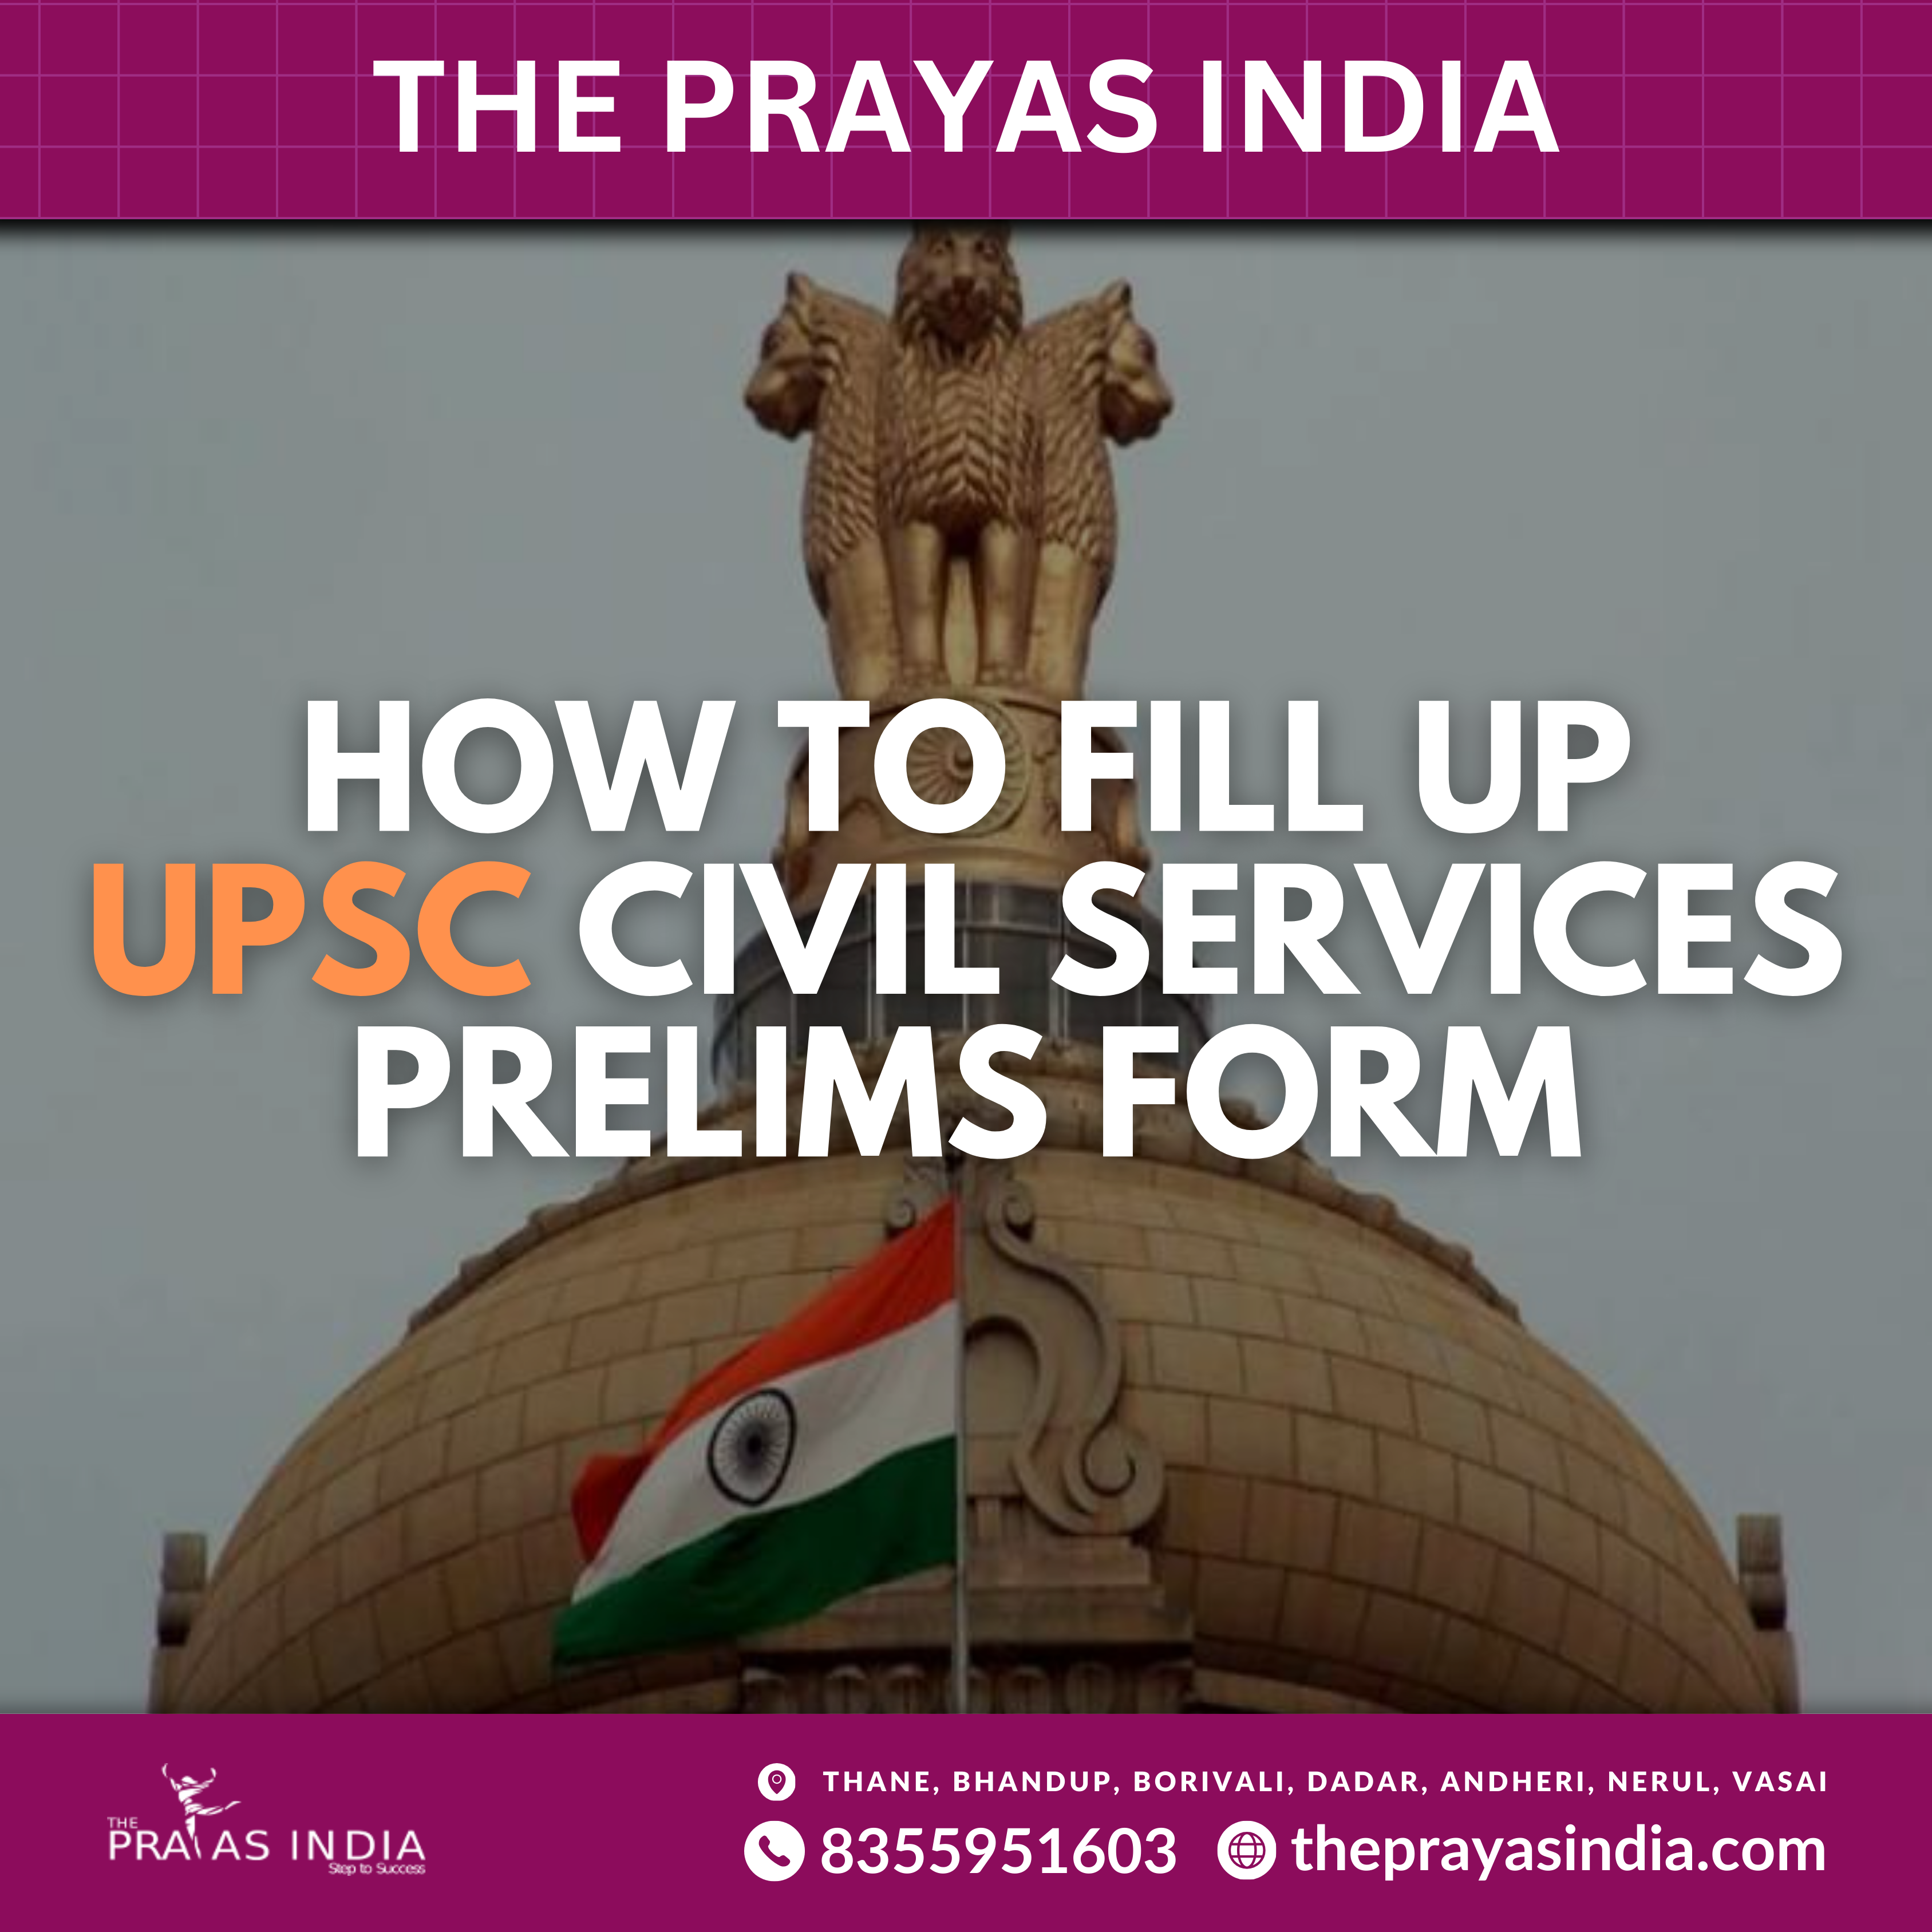 How to fill up UPSC civil services form